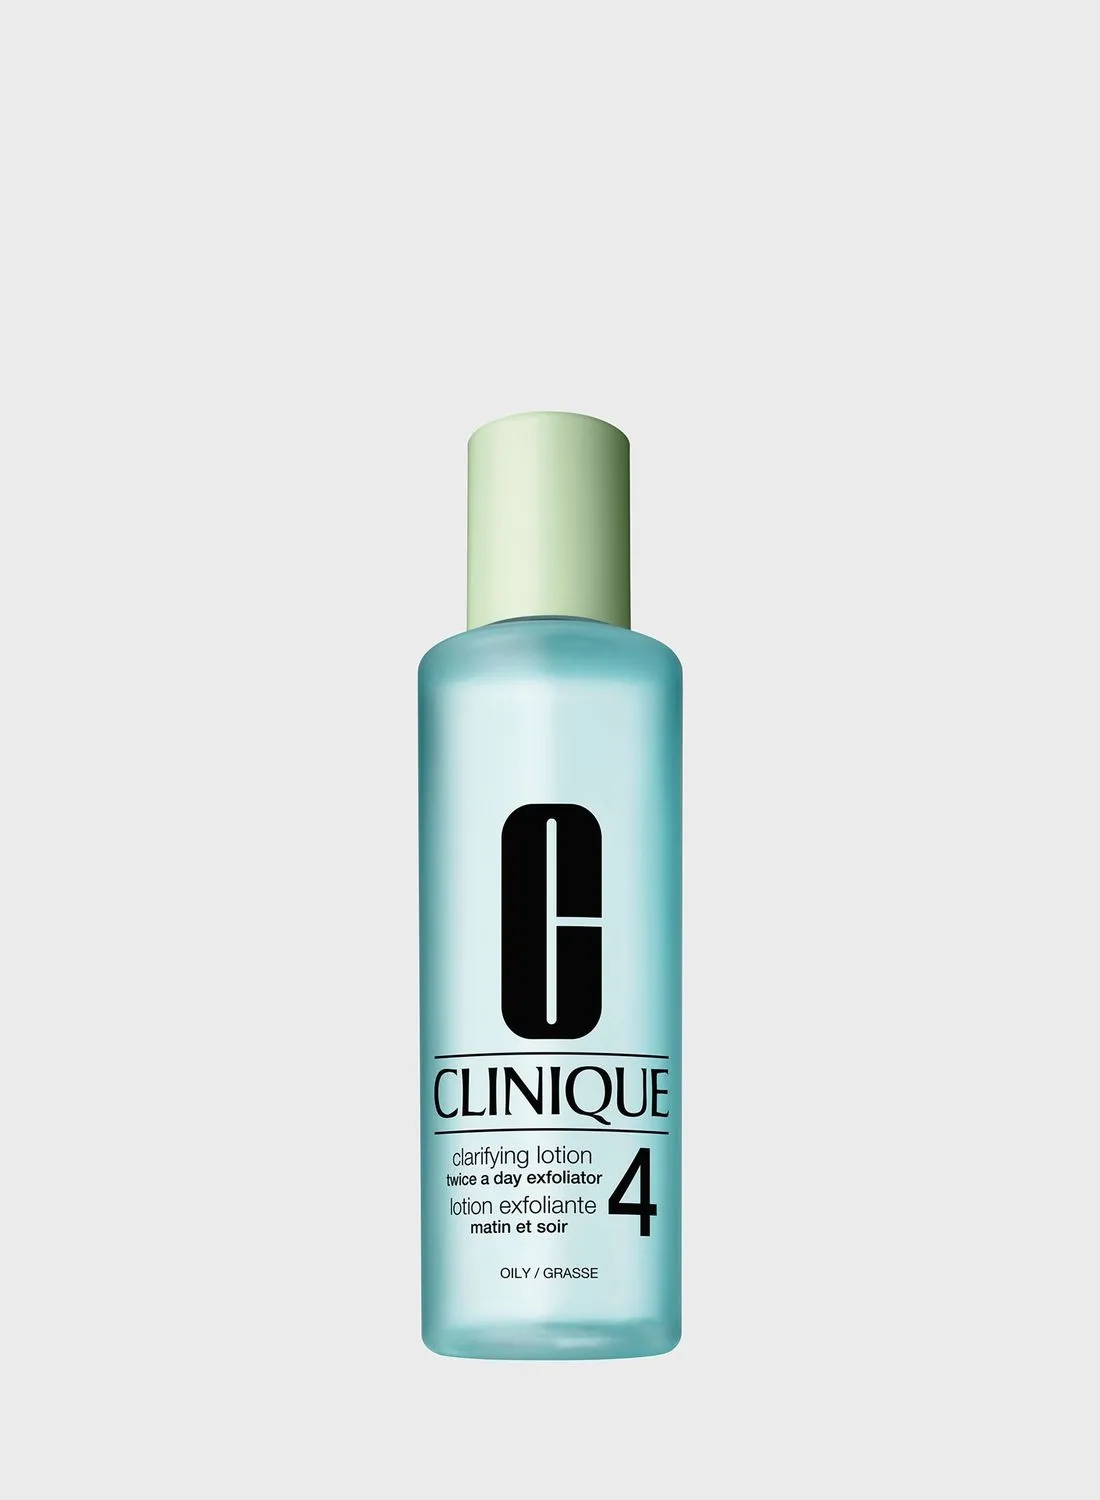 CLINIQUE Clarifying Lotion 4 -Oily Skin 400ml